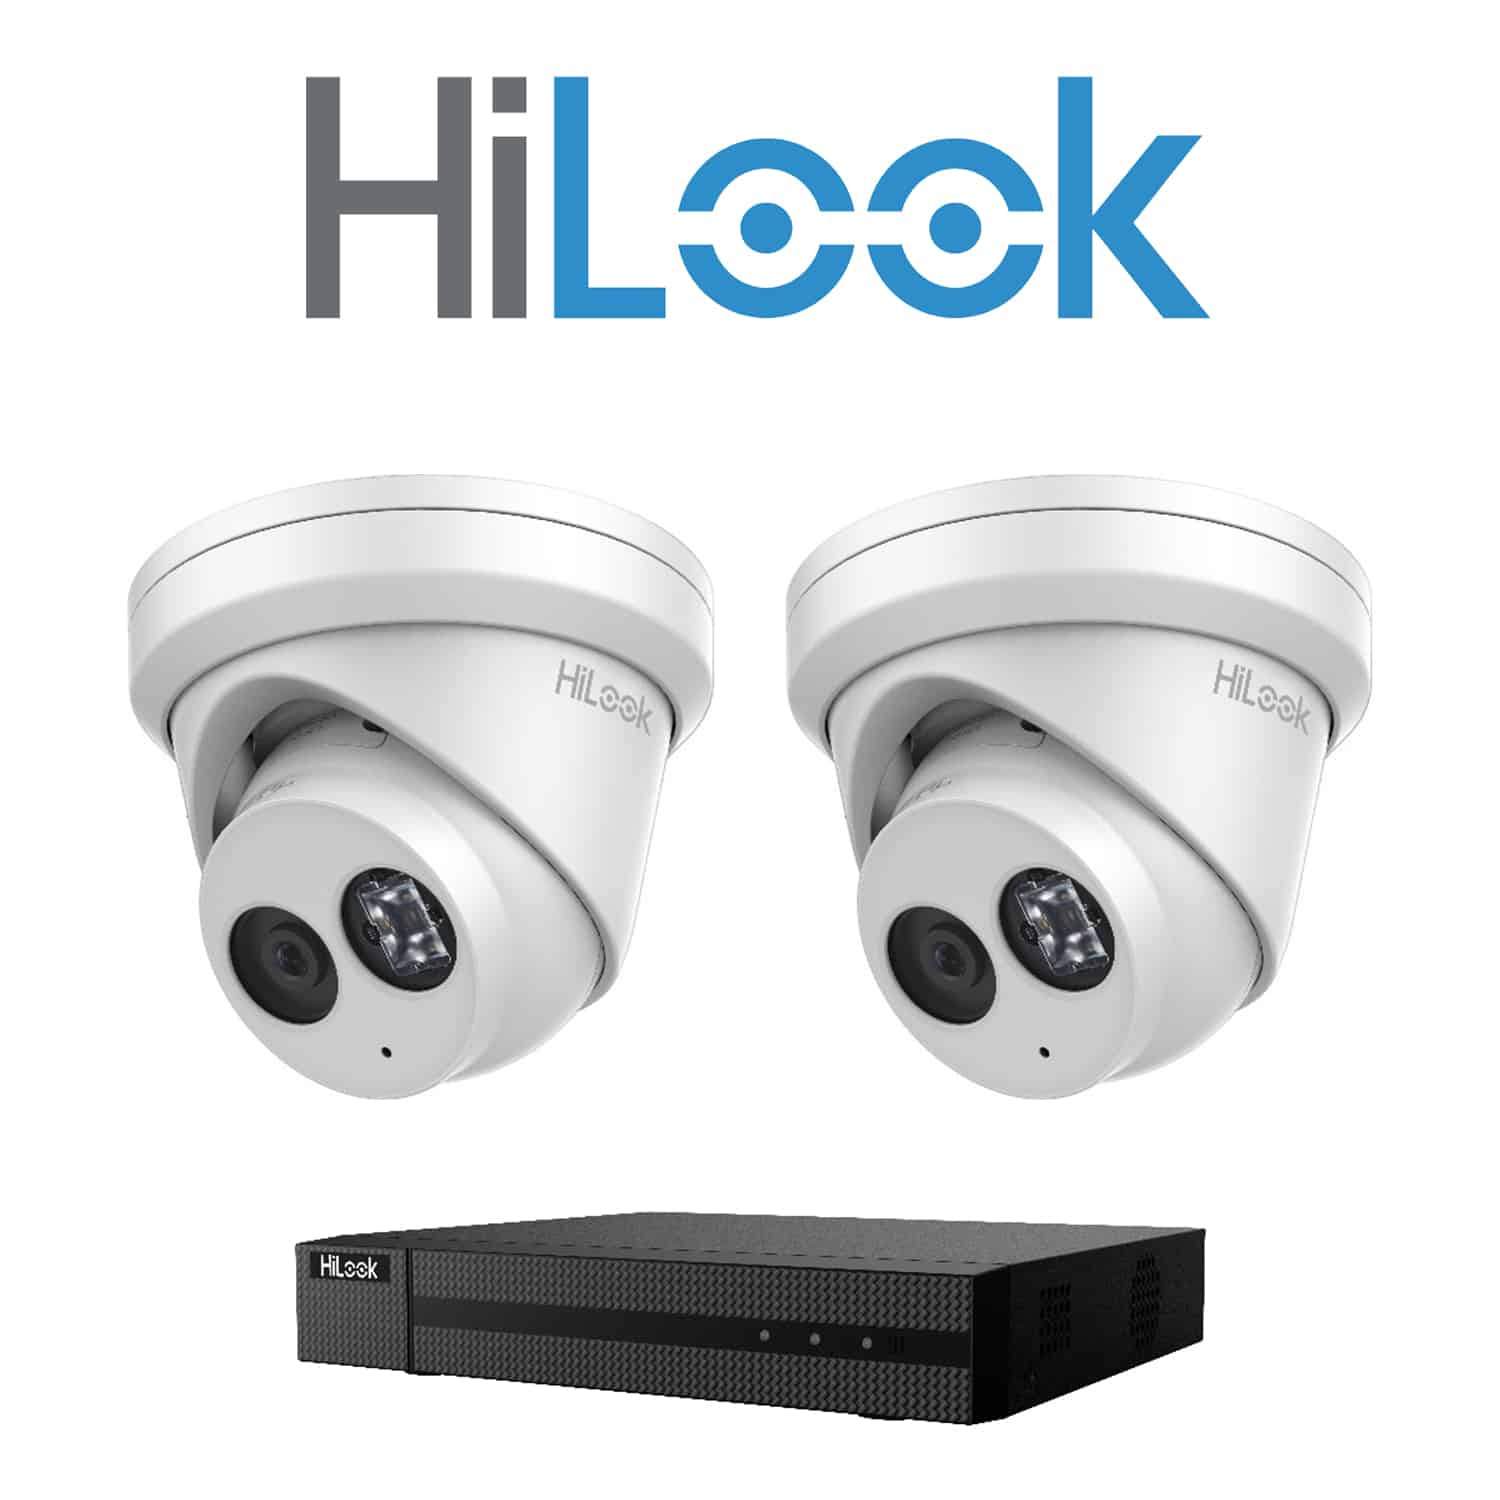 Hilook 8MP 2 camera package